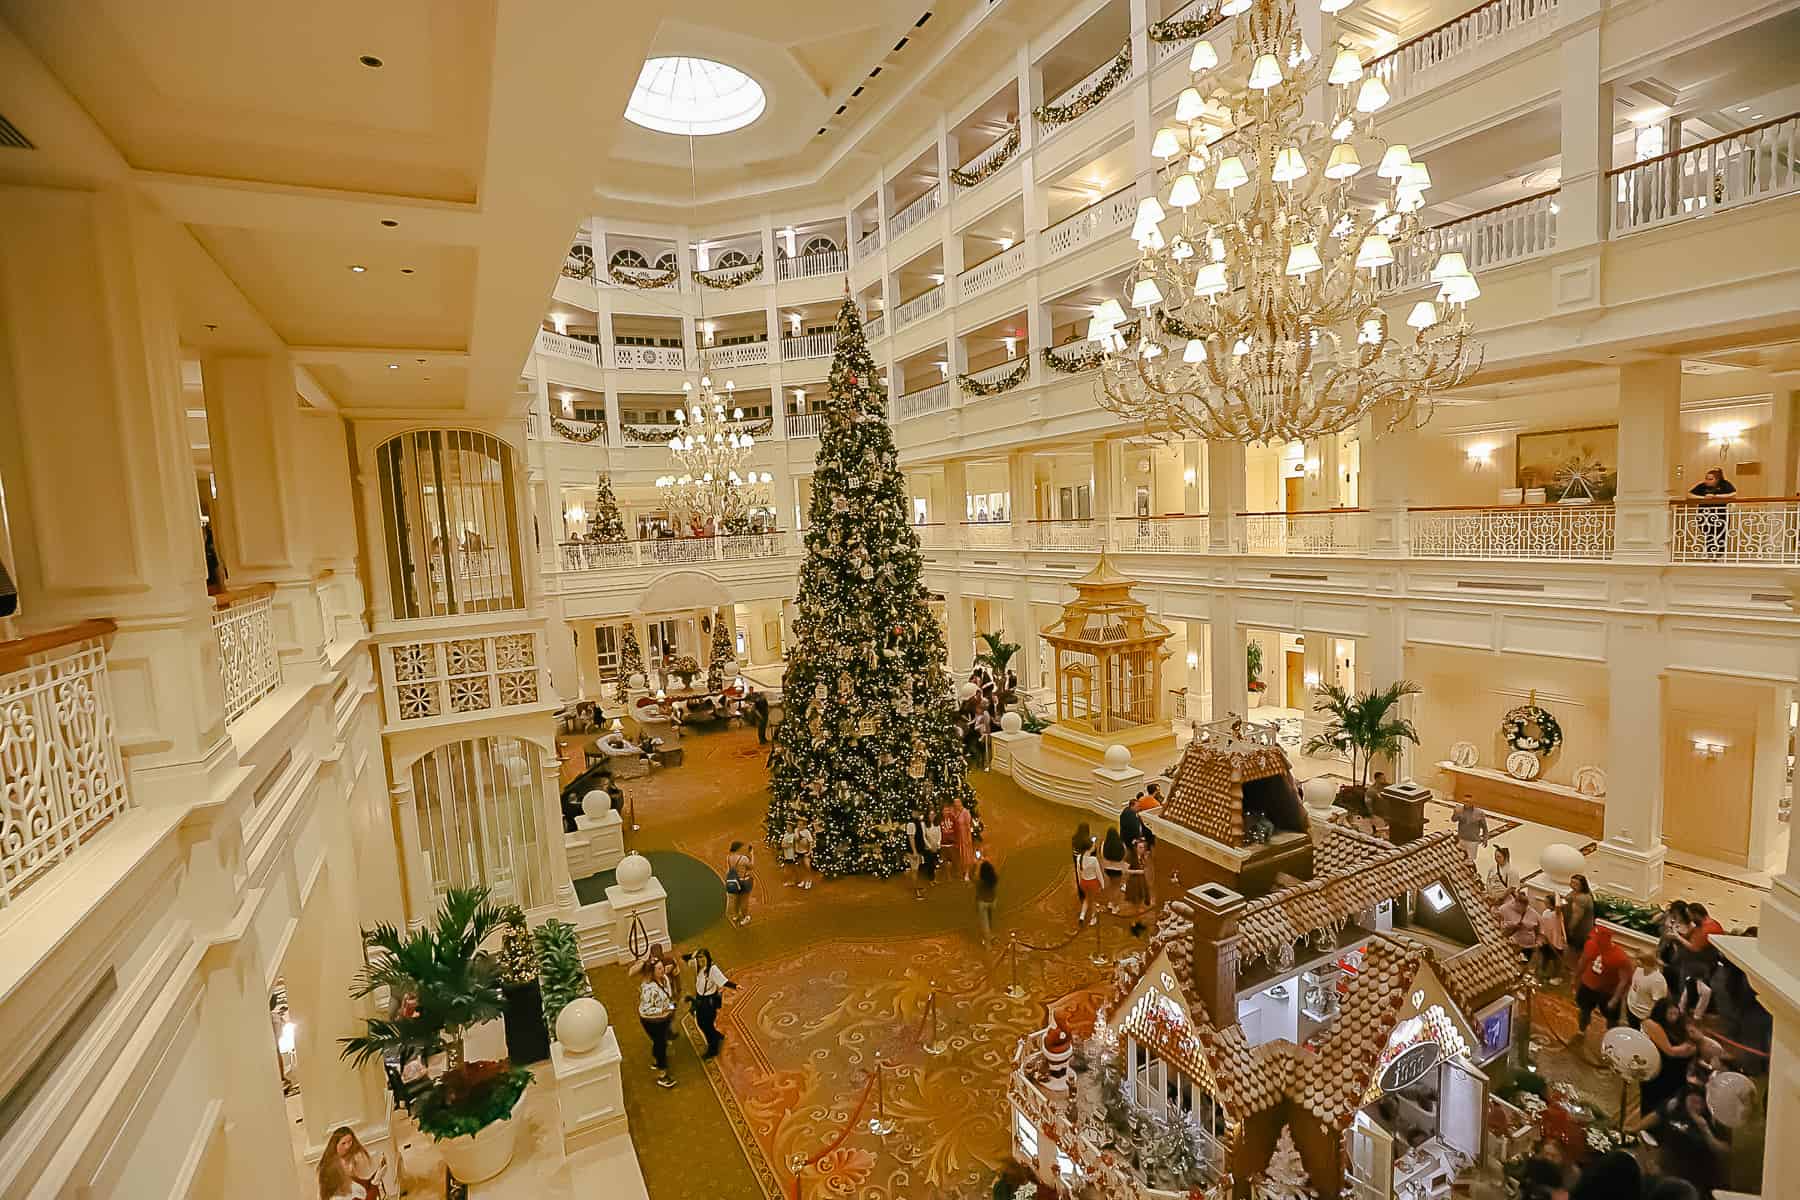 From the back of the lobby, you can see the gingerbread house and how it sits behind the tall Christmas Tree. 